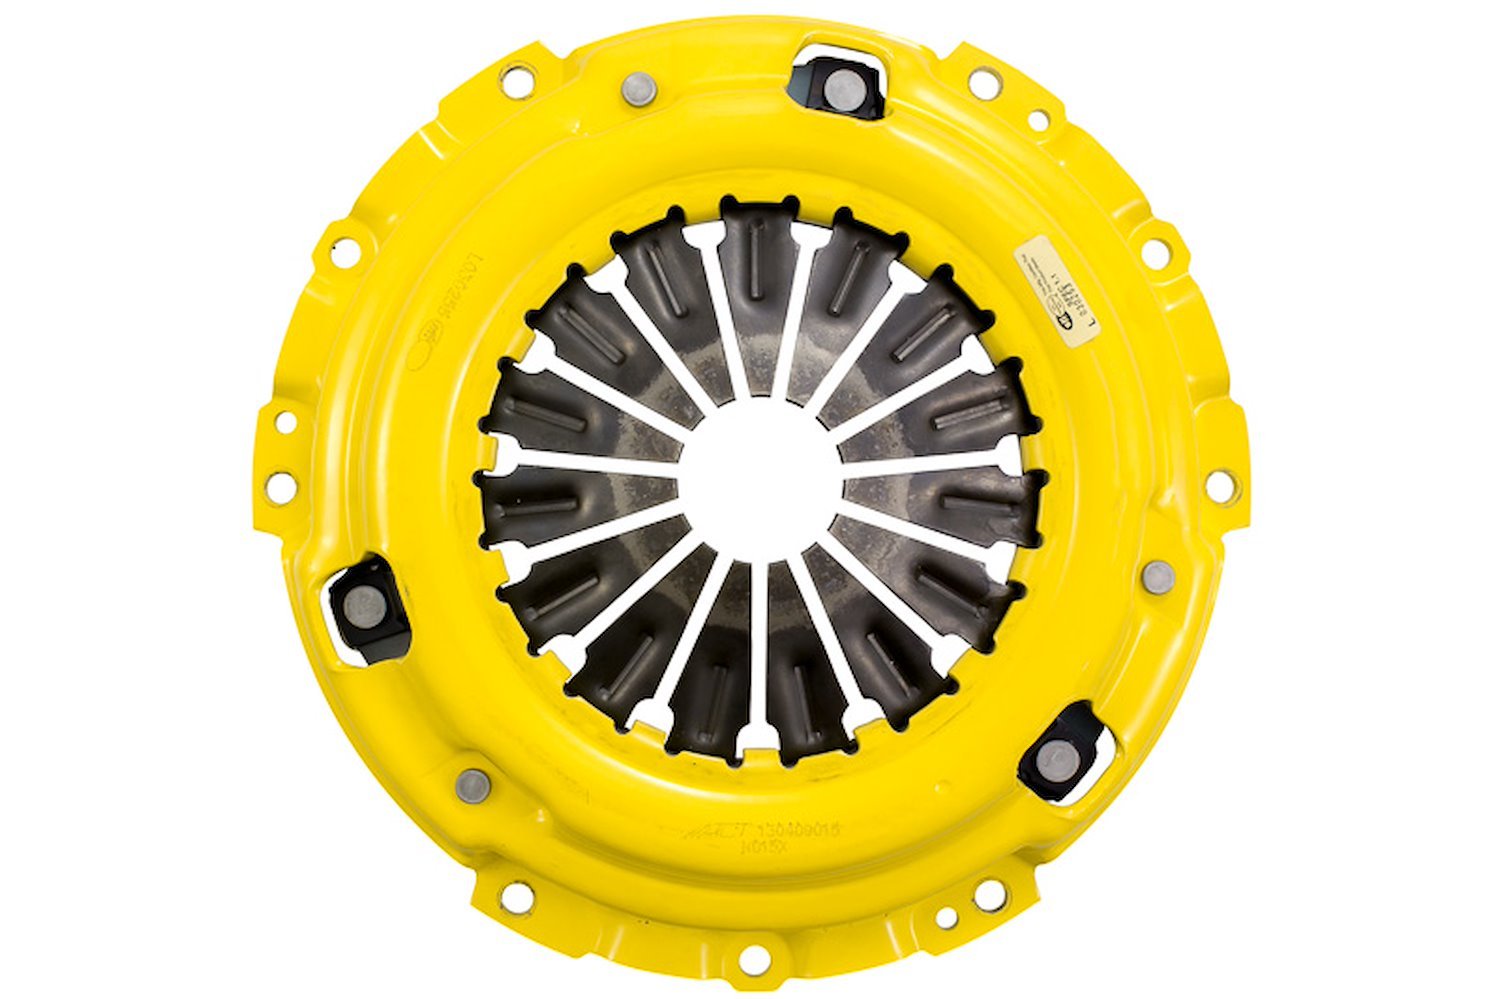 Xtreme Transmission Clutch Pressure Plate Fits Select Infiniti/Nissan